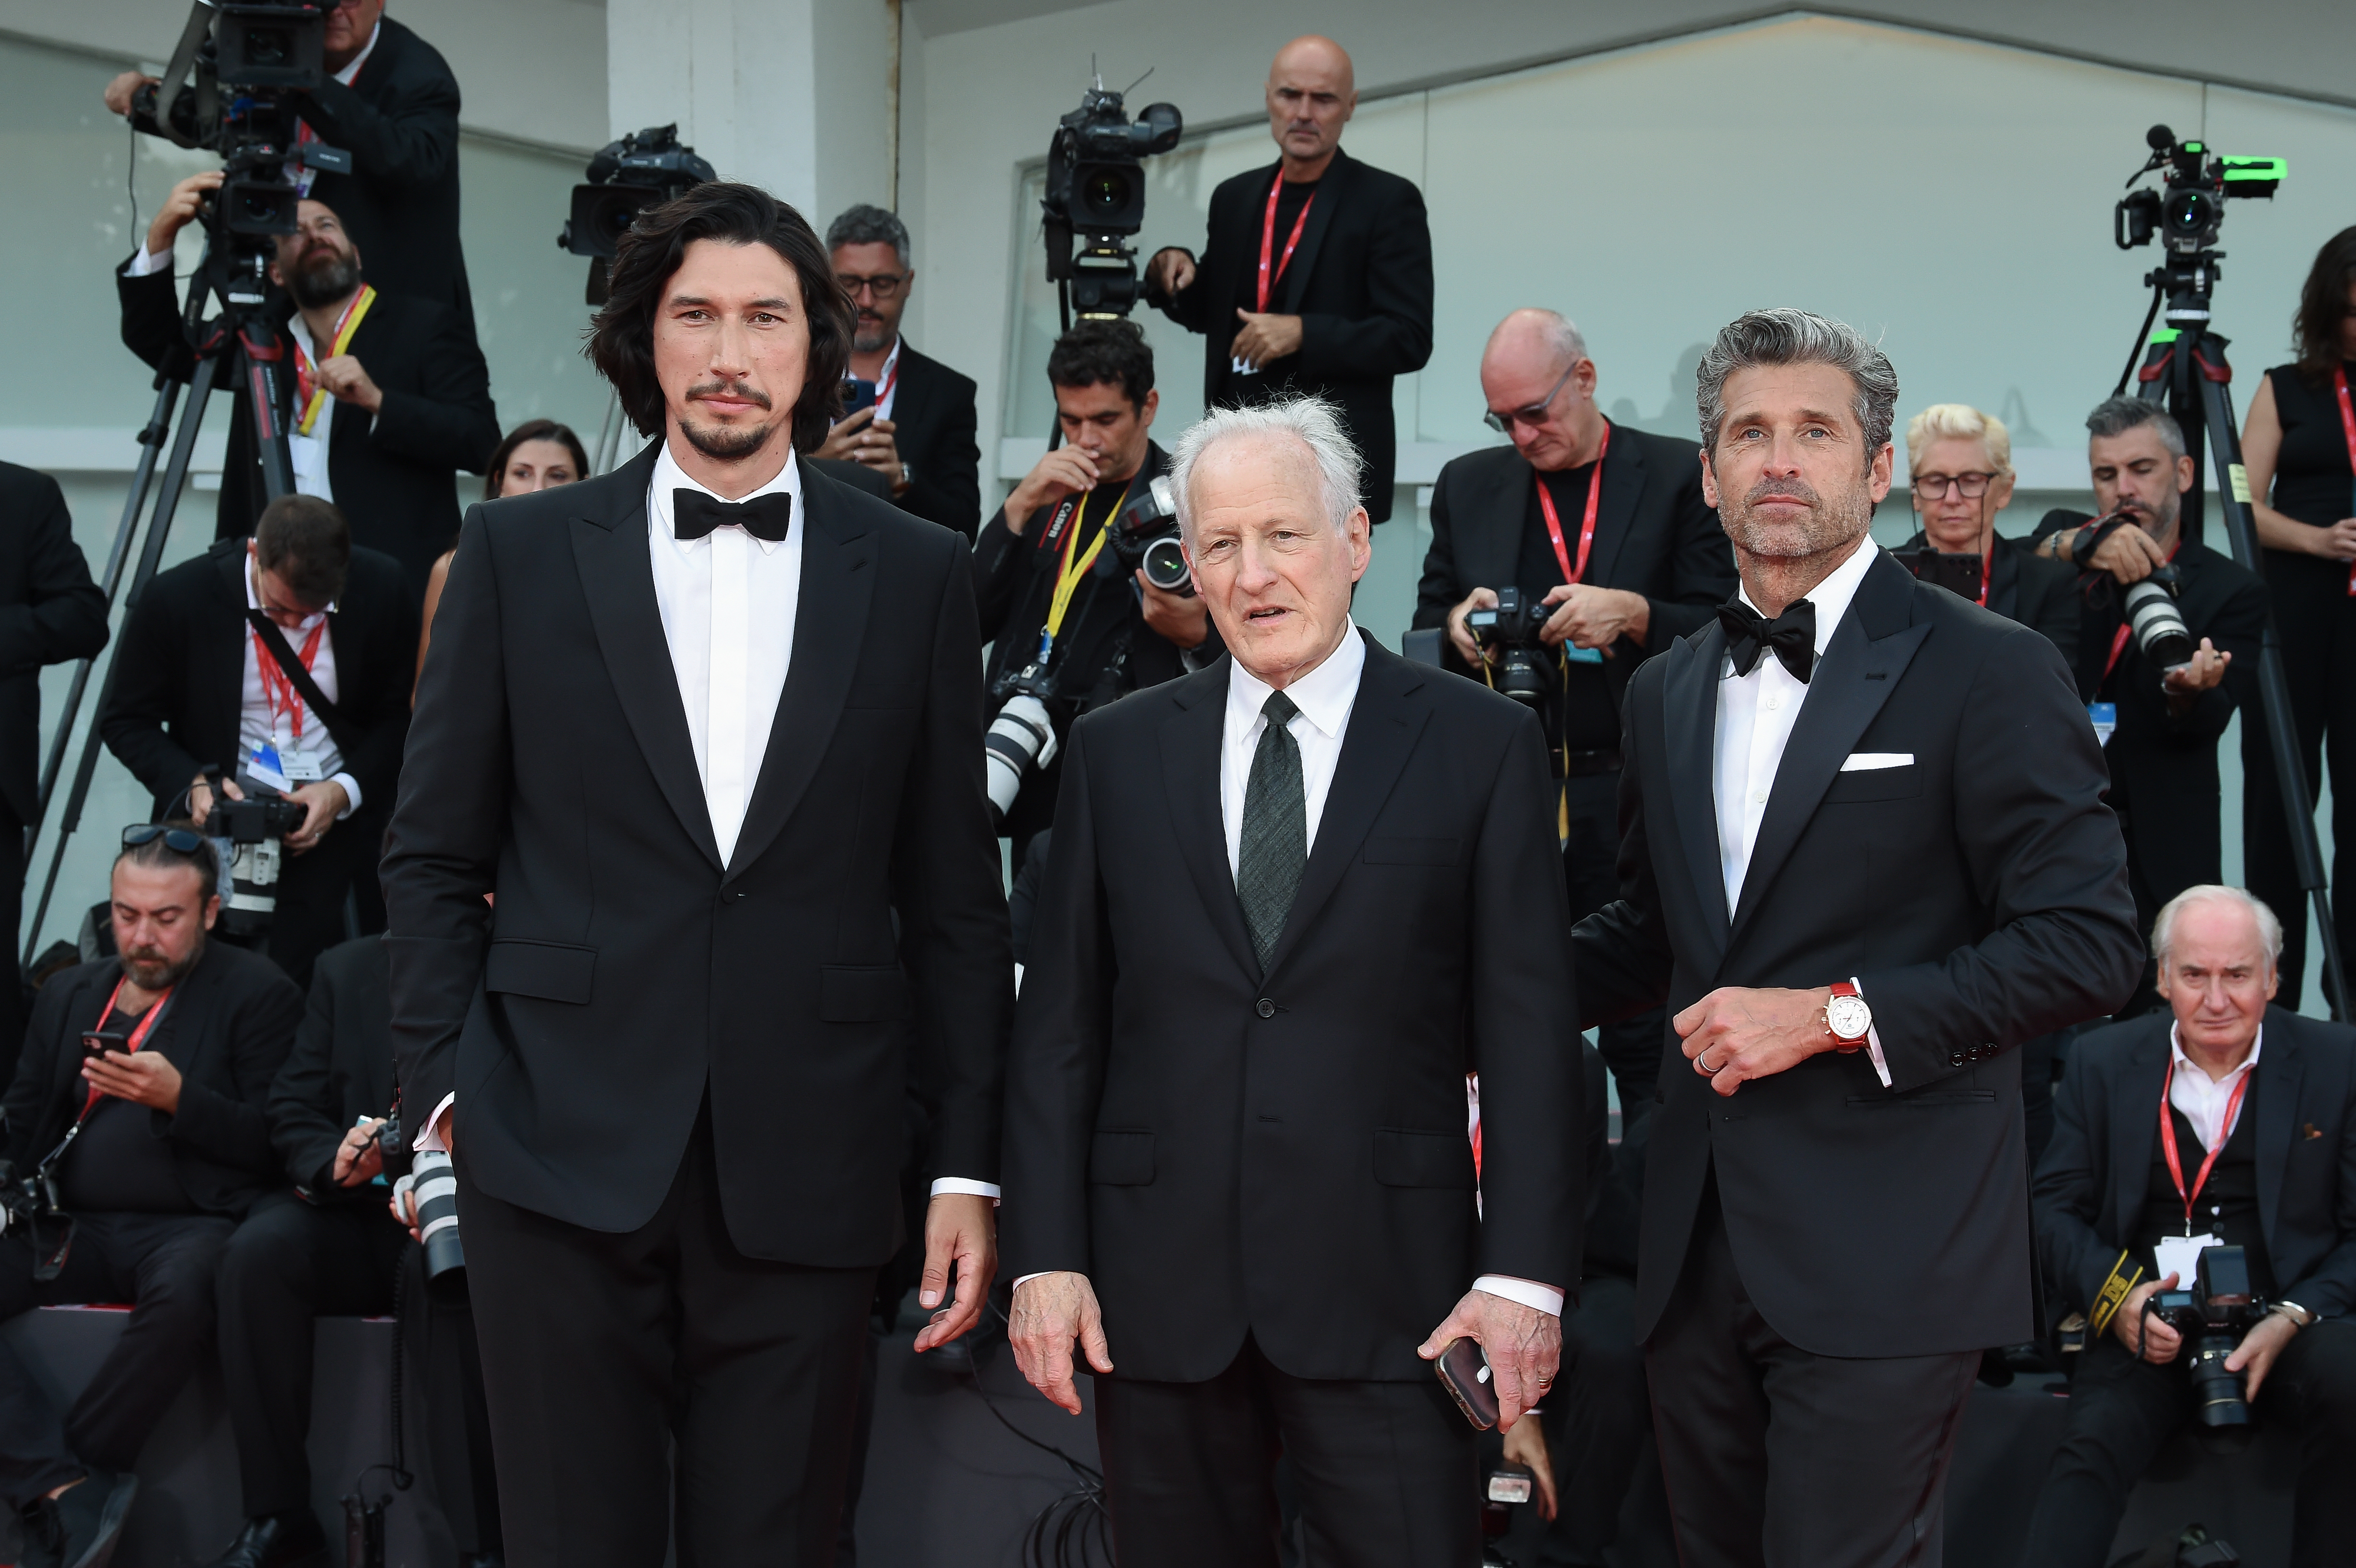 Adam Driver's appeal as an actor has been mischaracterised. He's a very  modern movie star